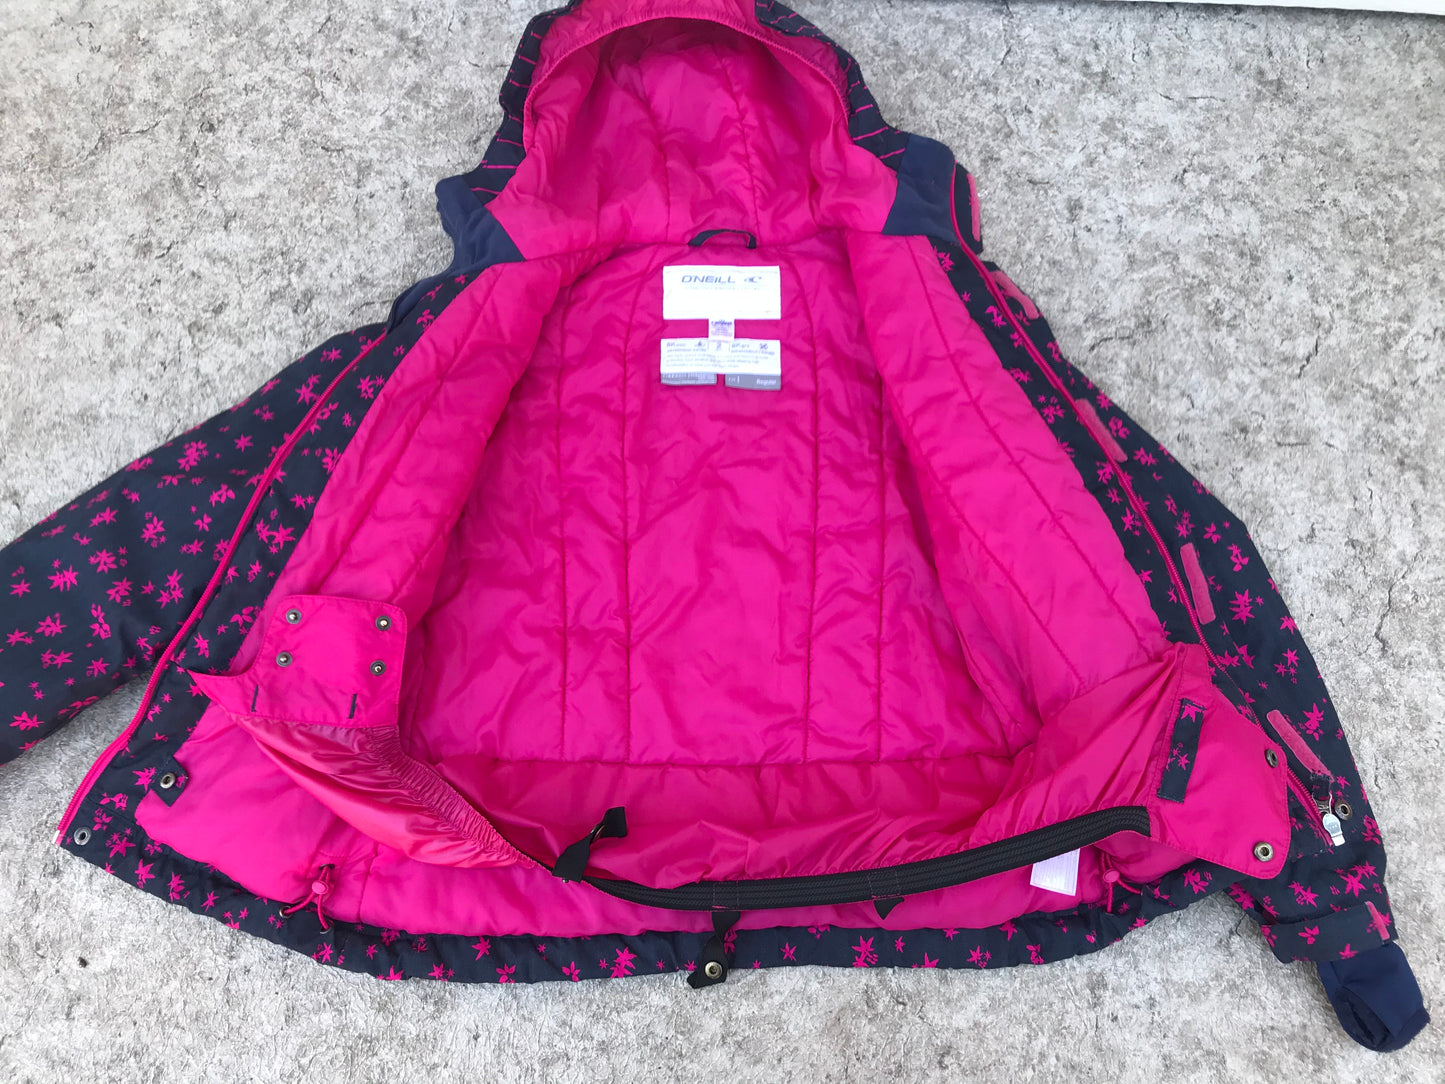 Winter Coat Child Size 10 Oneill Snowboarding Marine Blue Fushia With Snow Belt Excellent